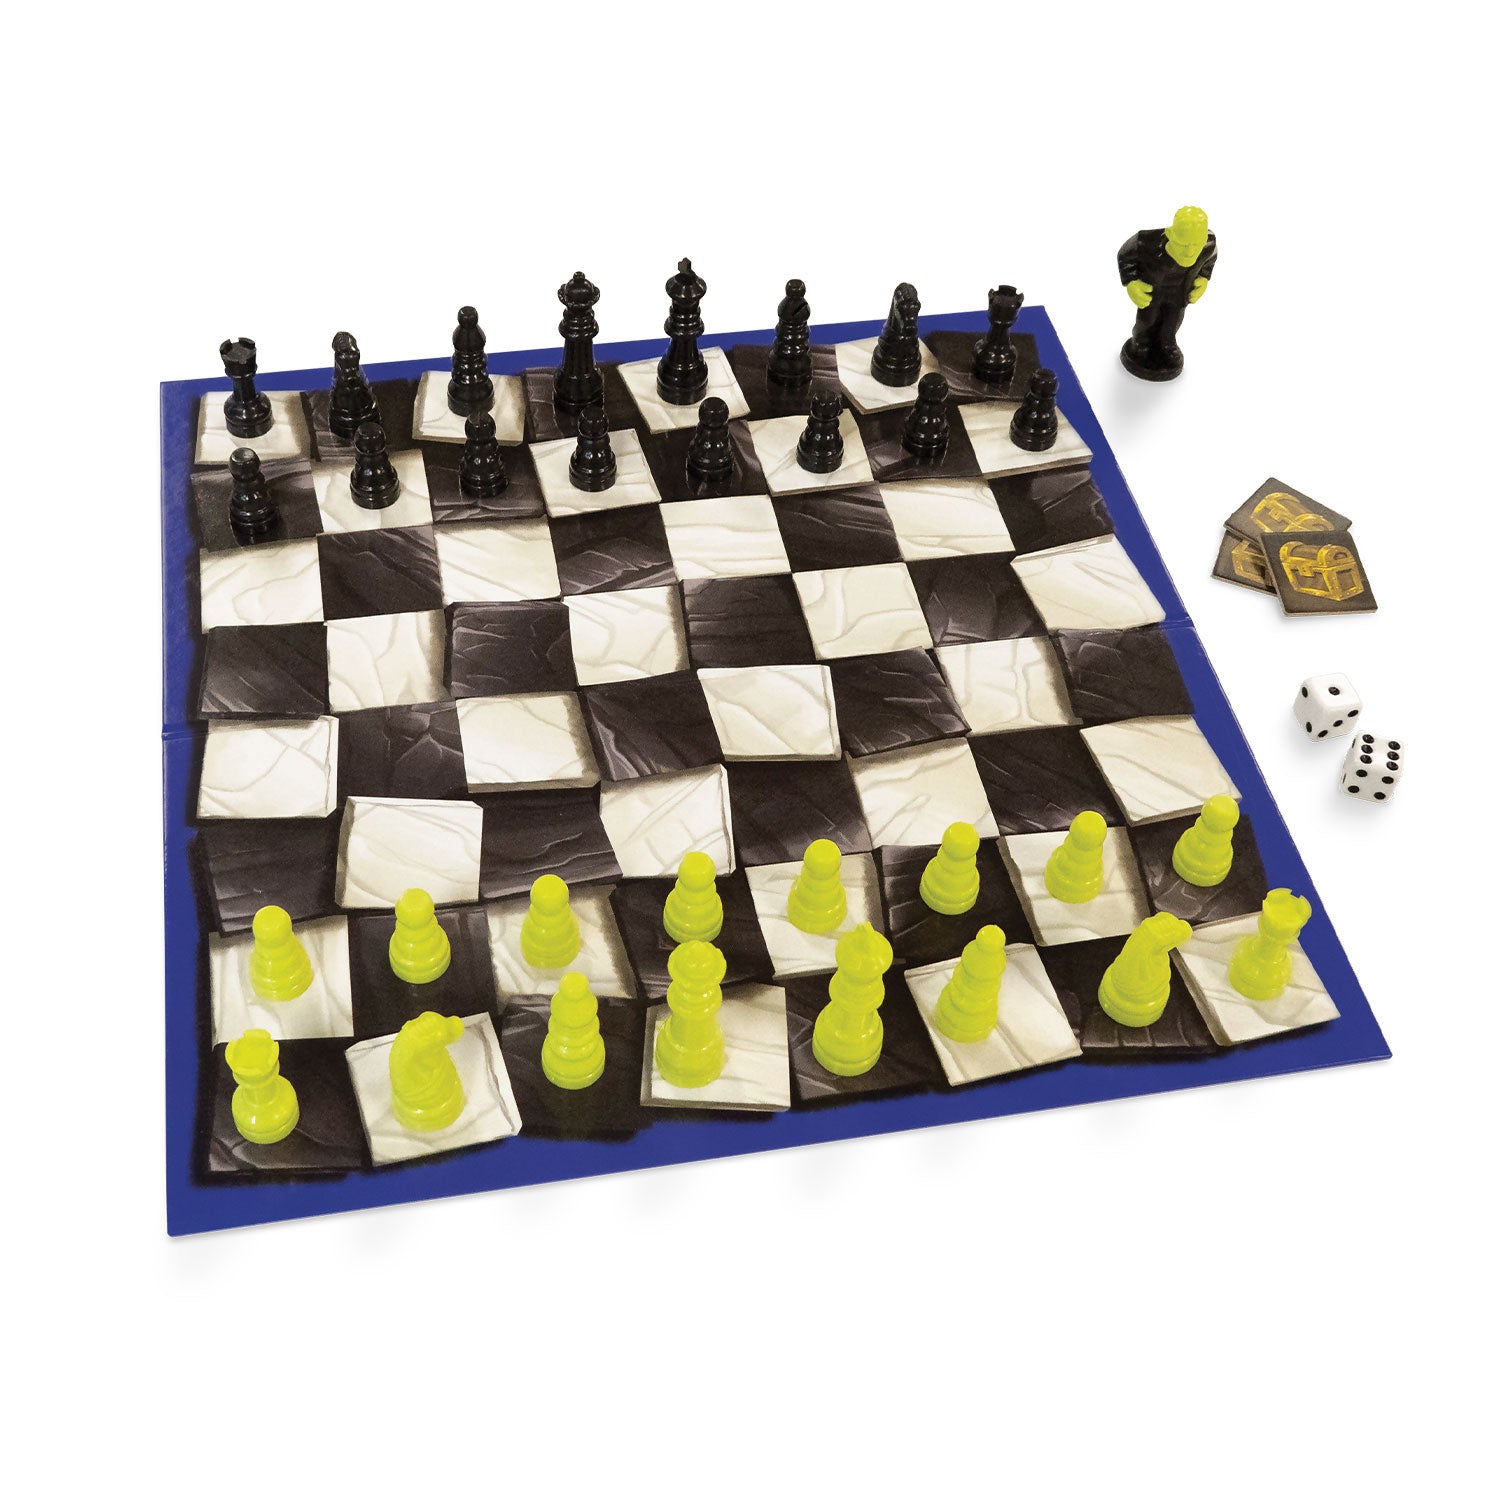 CHESS: The Game of Strategy